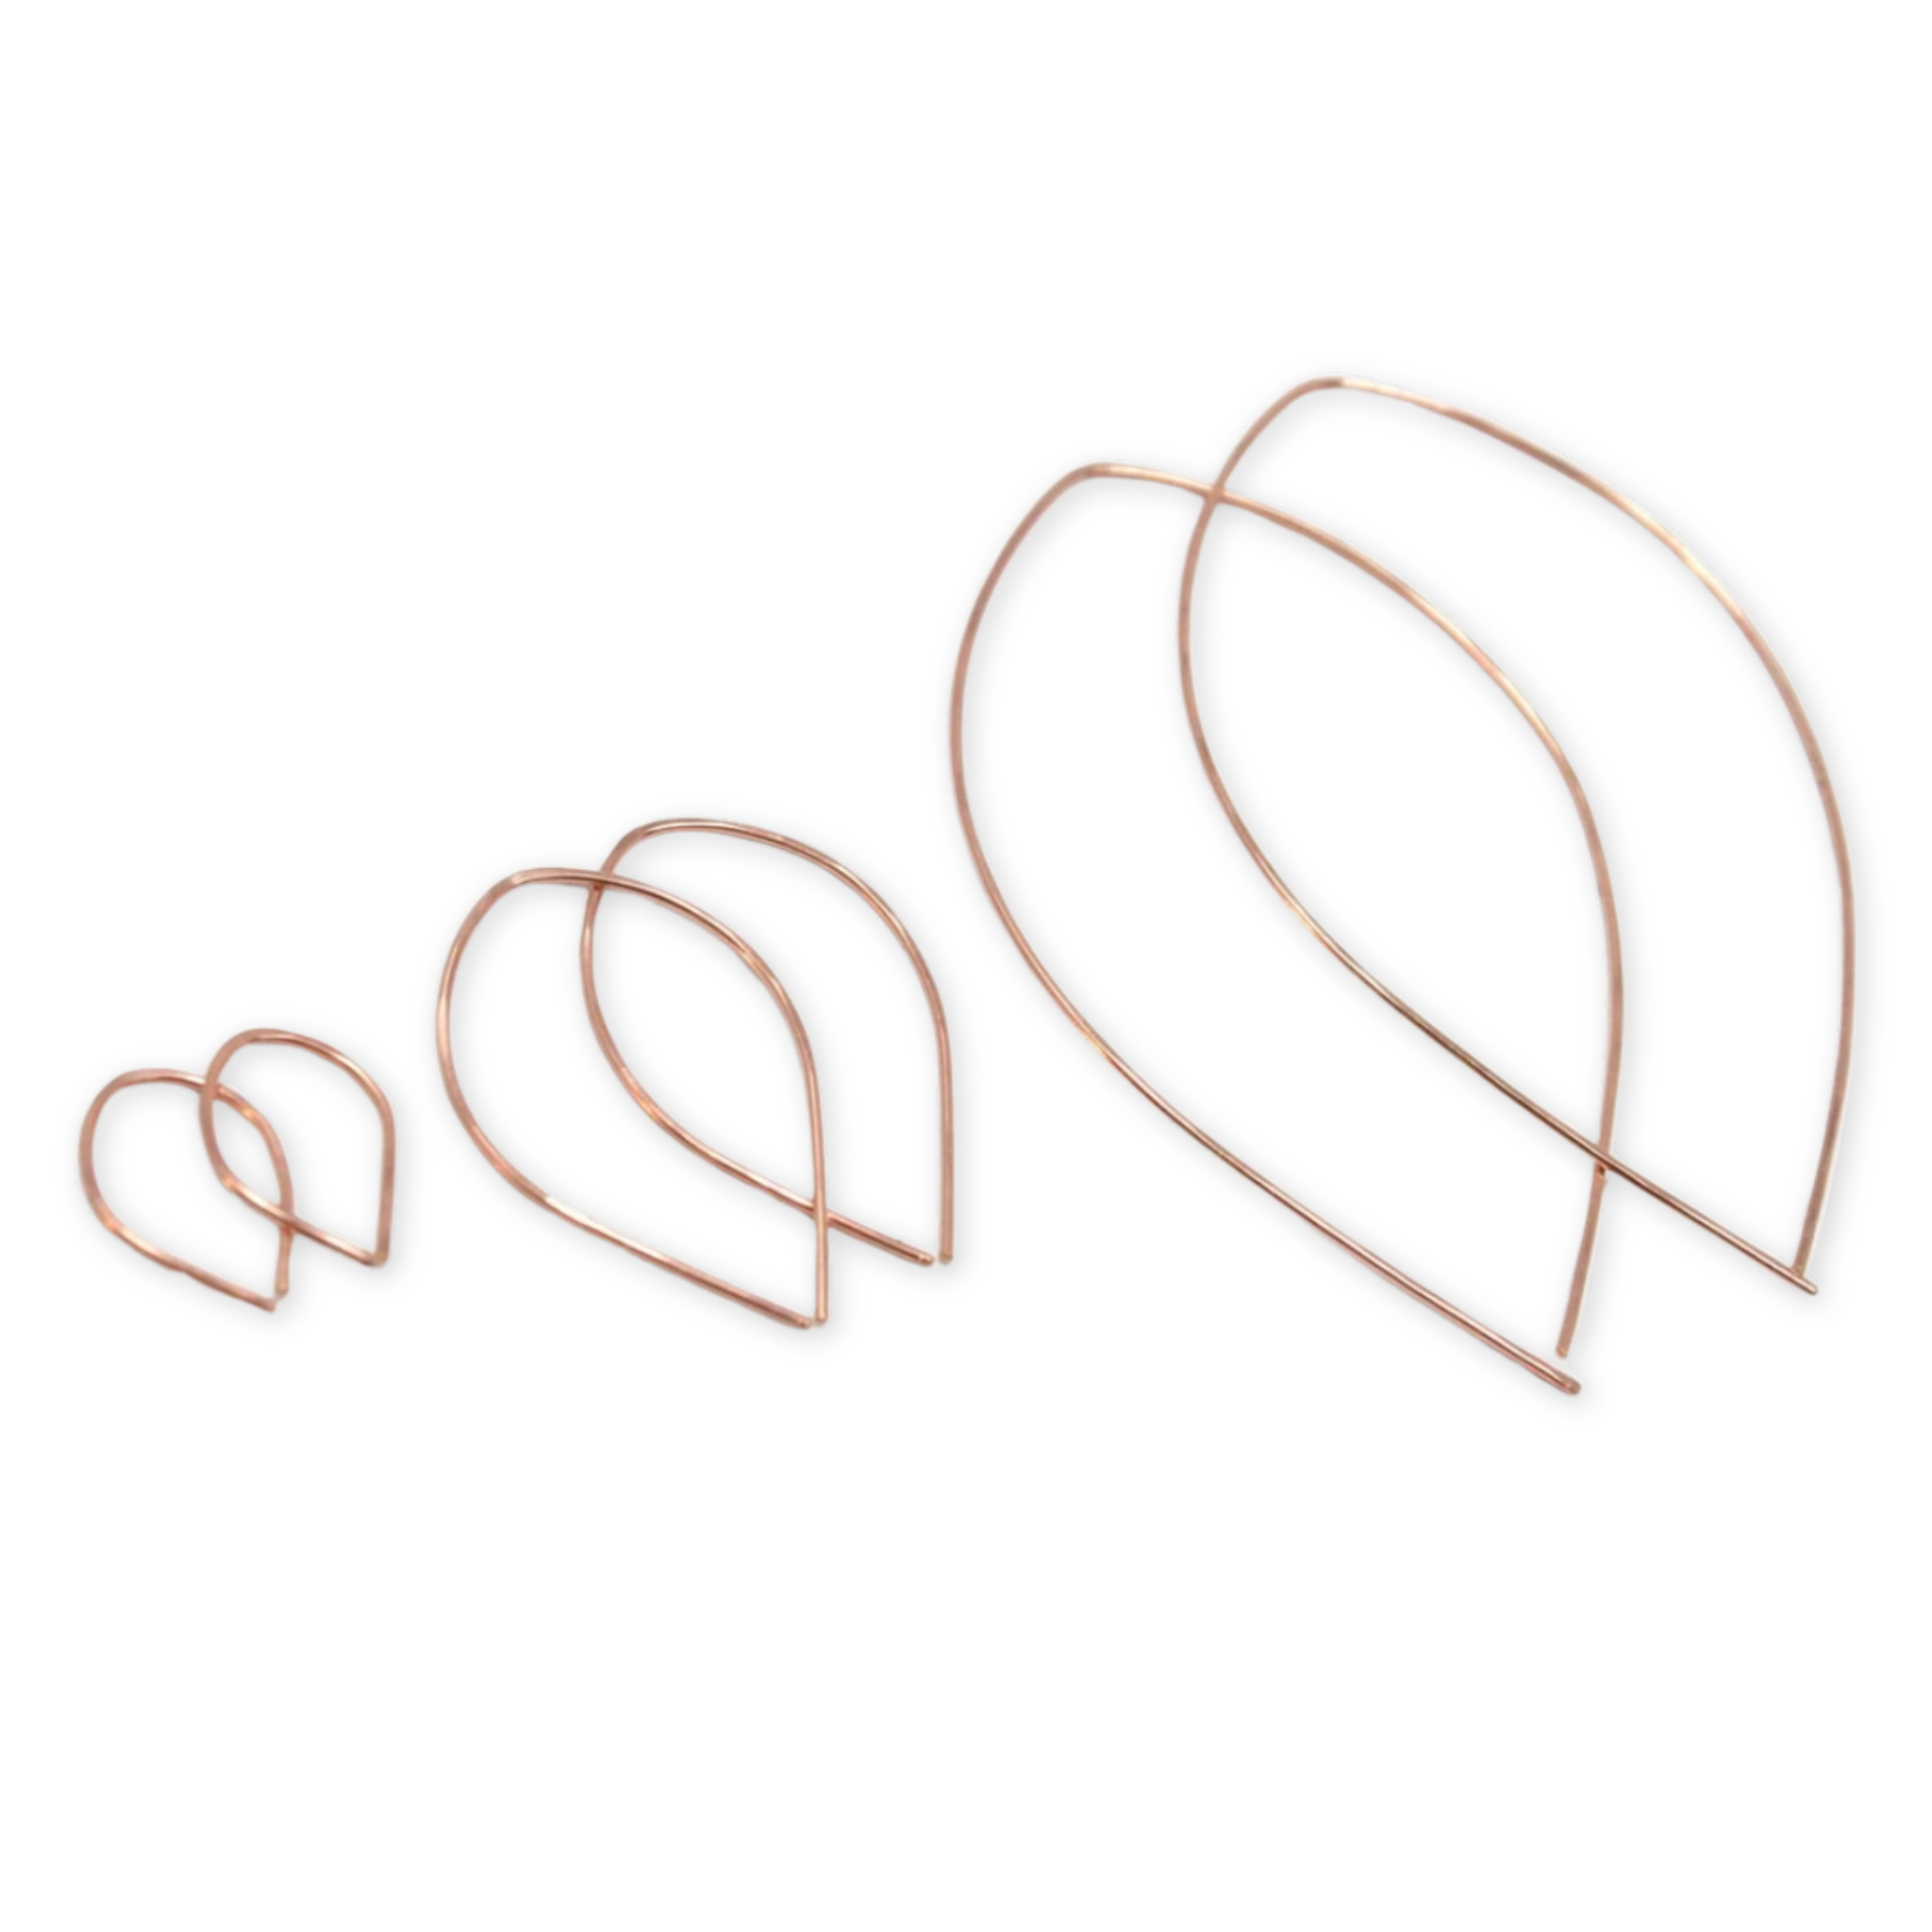 teardrop shaped hoops in different sizes